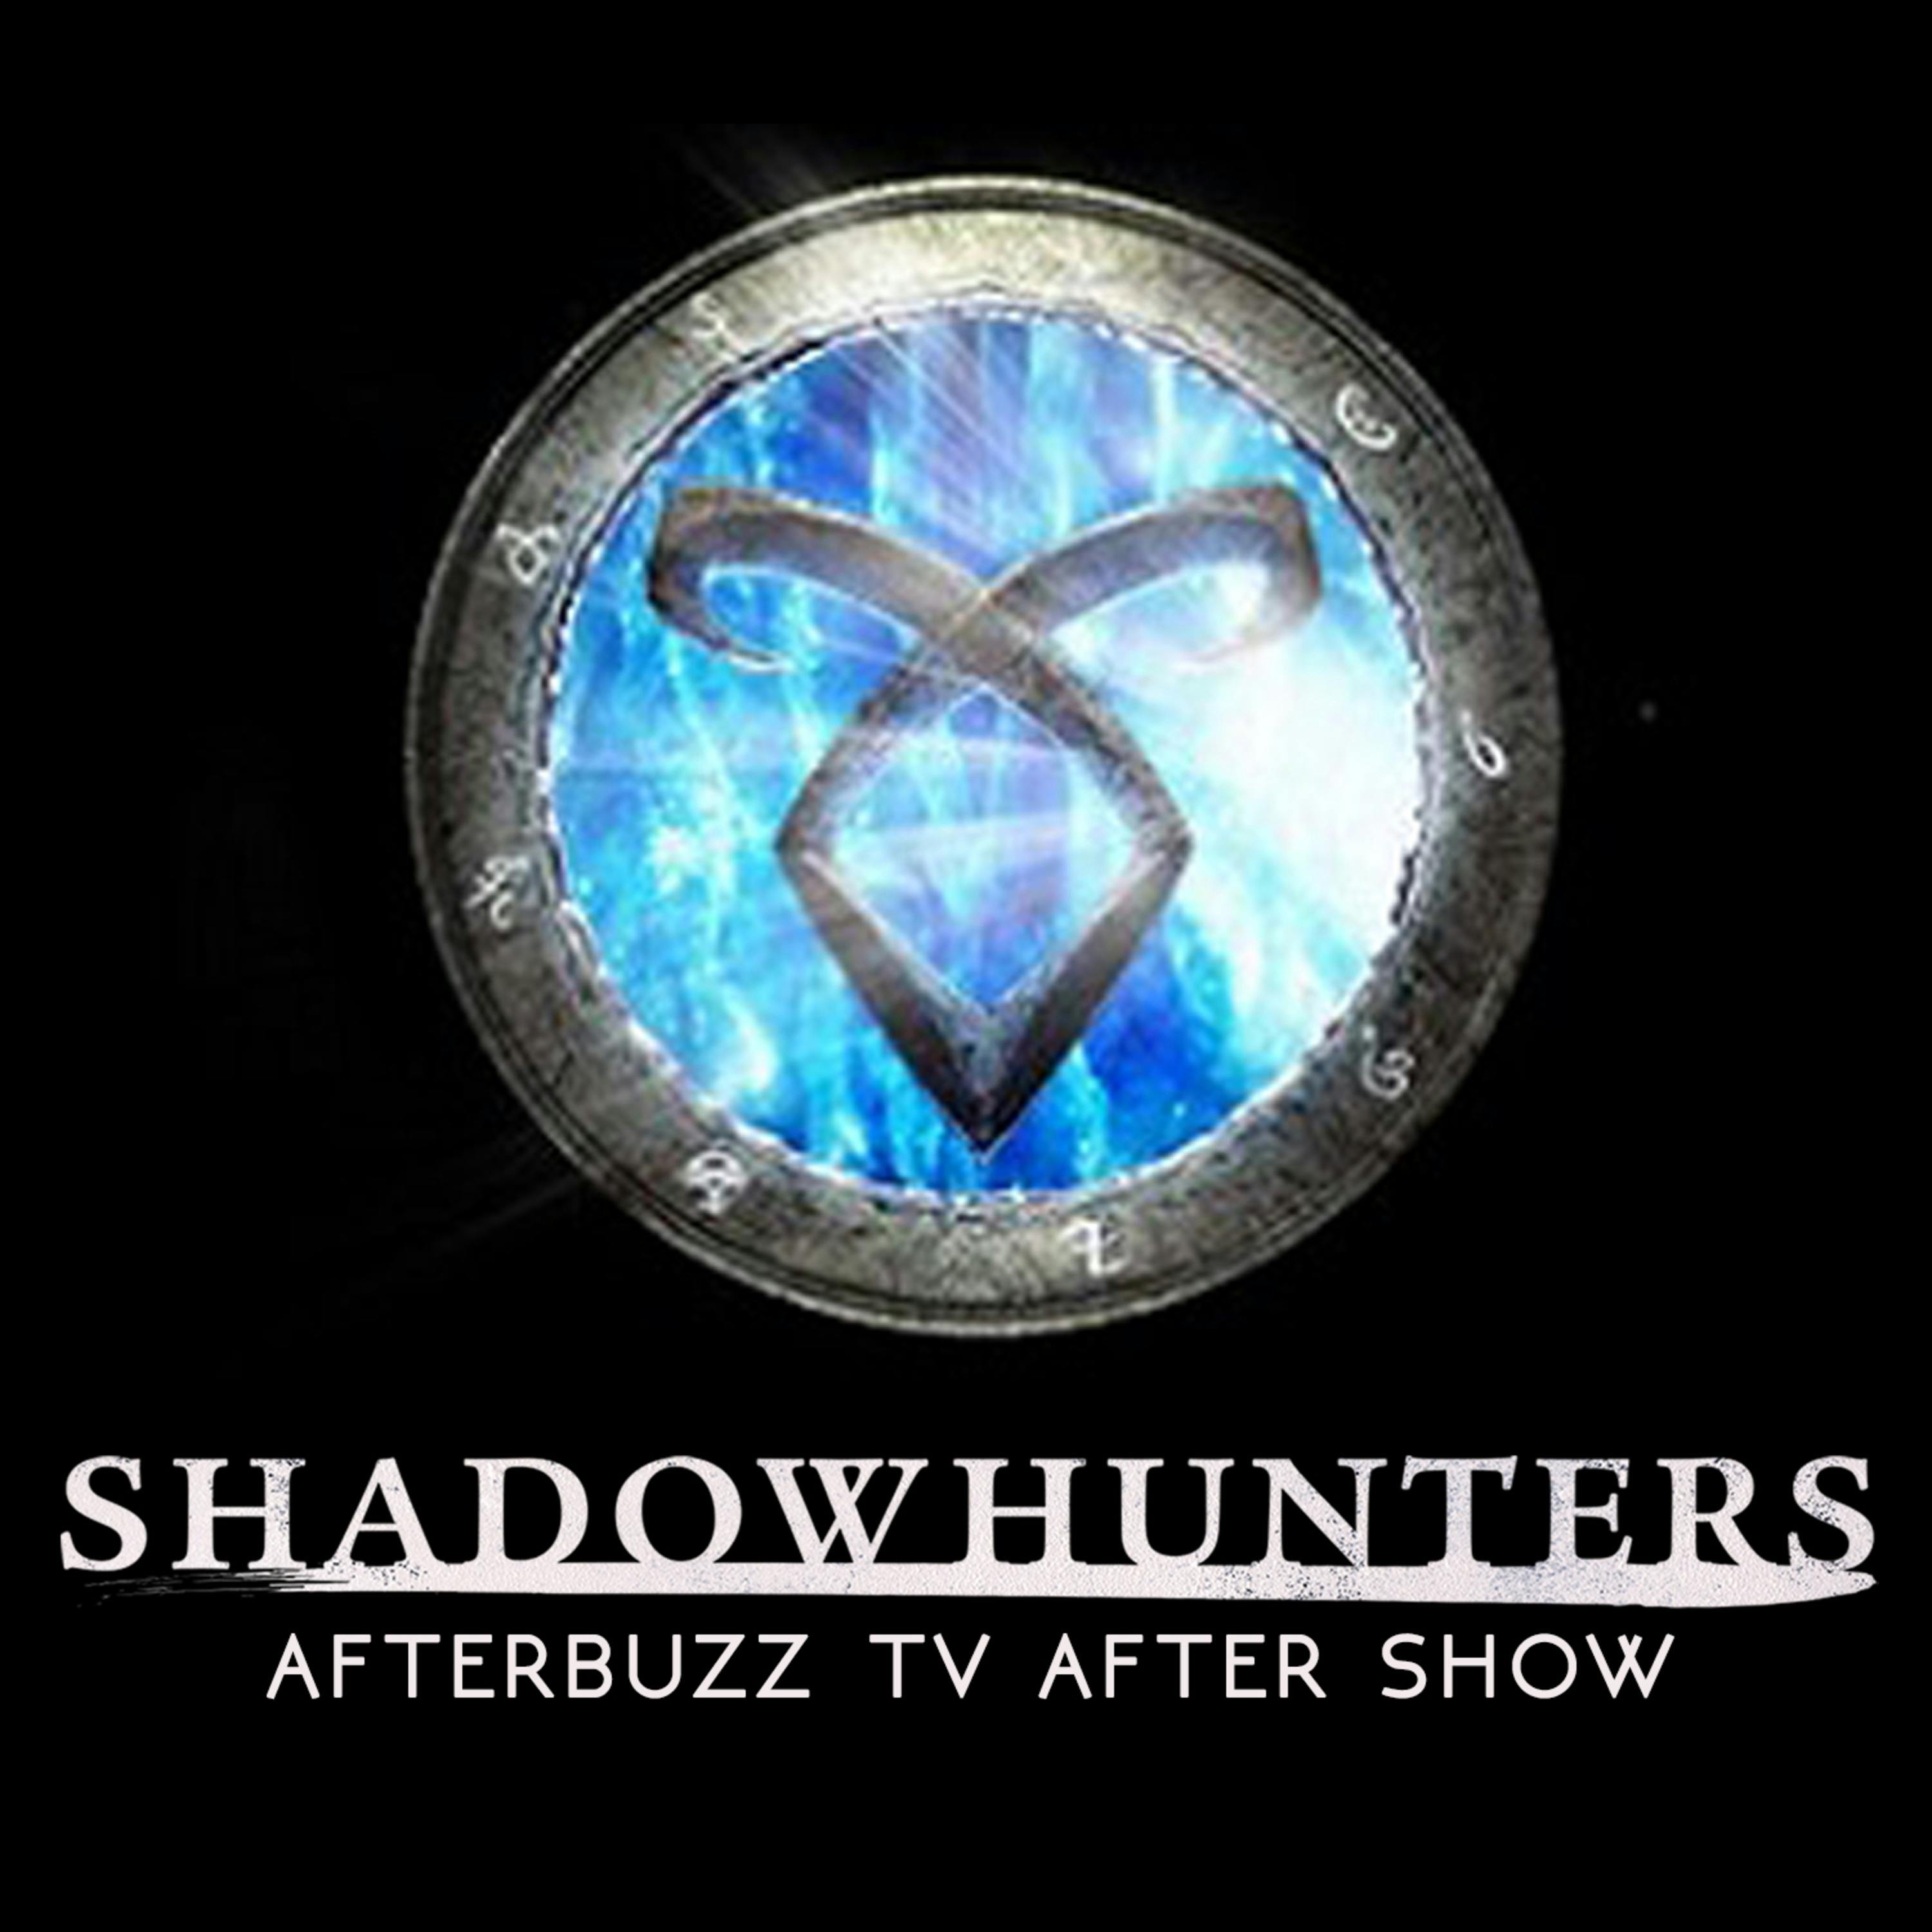 ”Alliance; All Good Things...” Season 3 Episodes 21 & 22 ’Shadowhunters’ Review